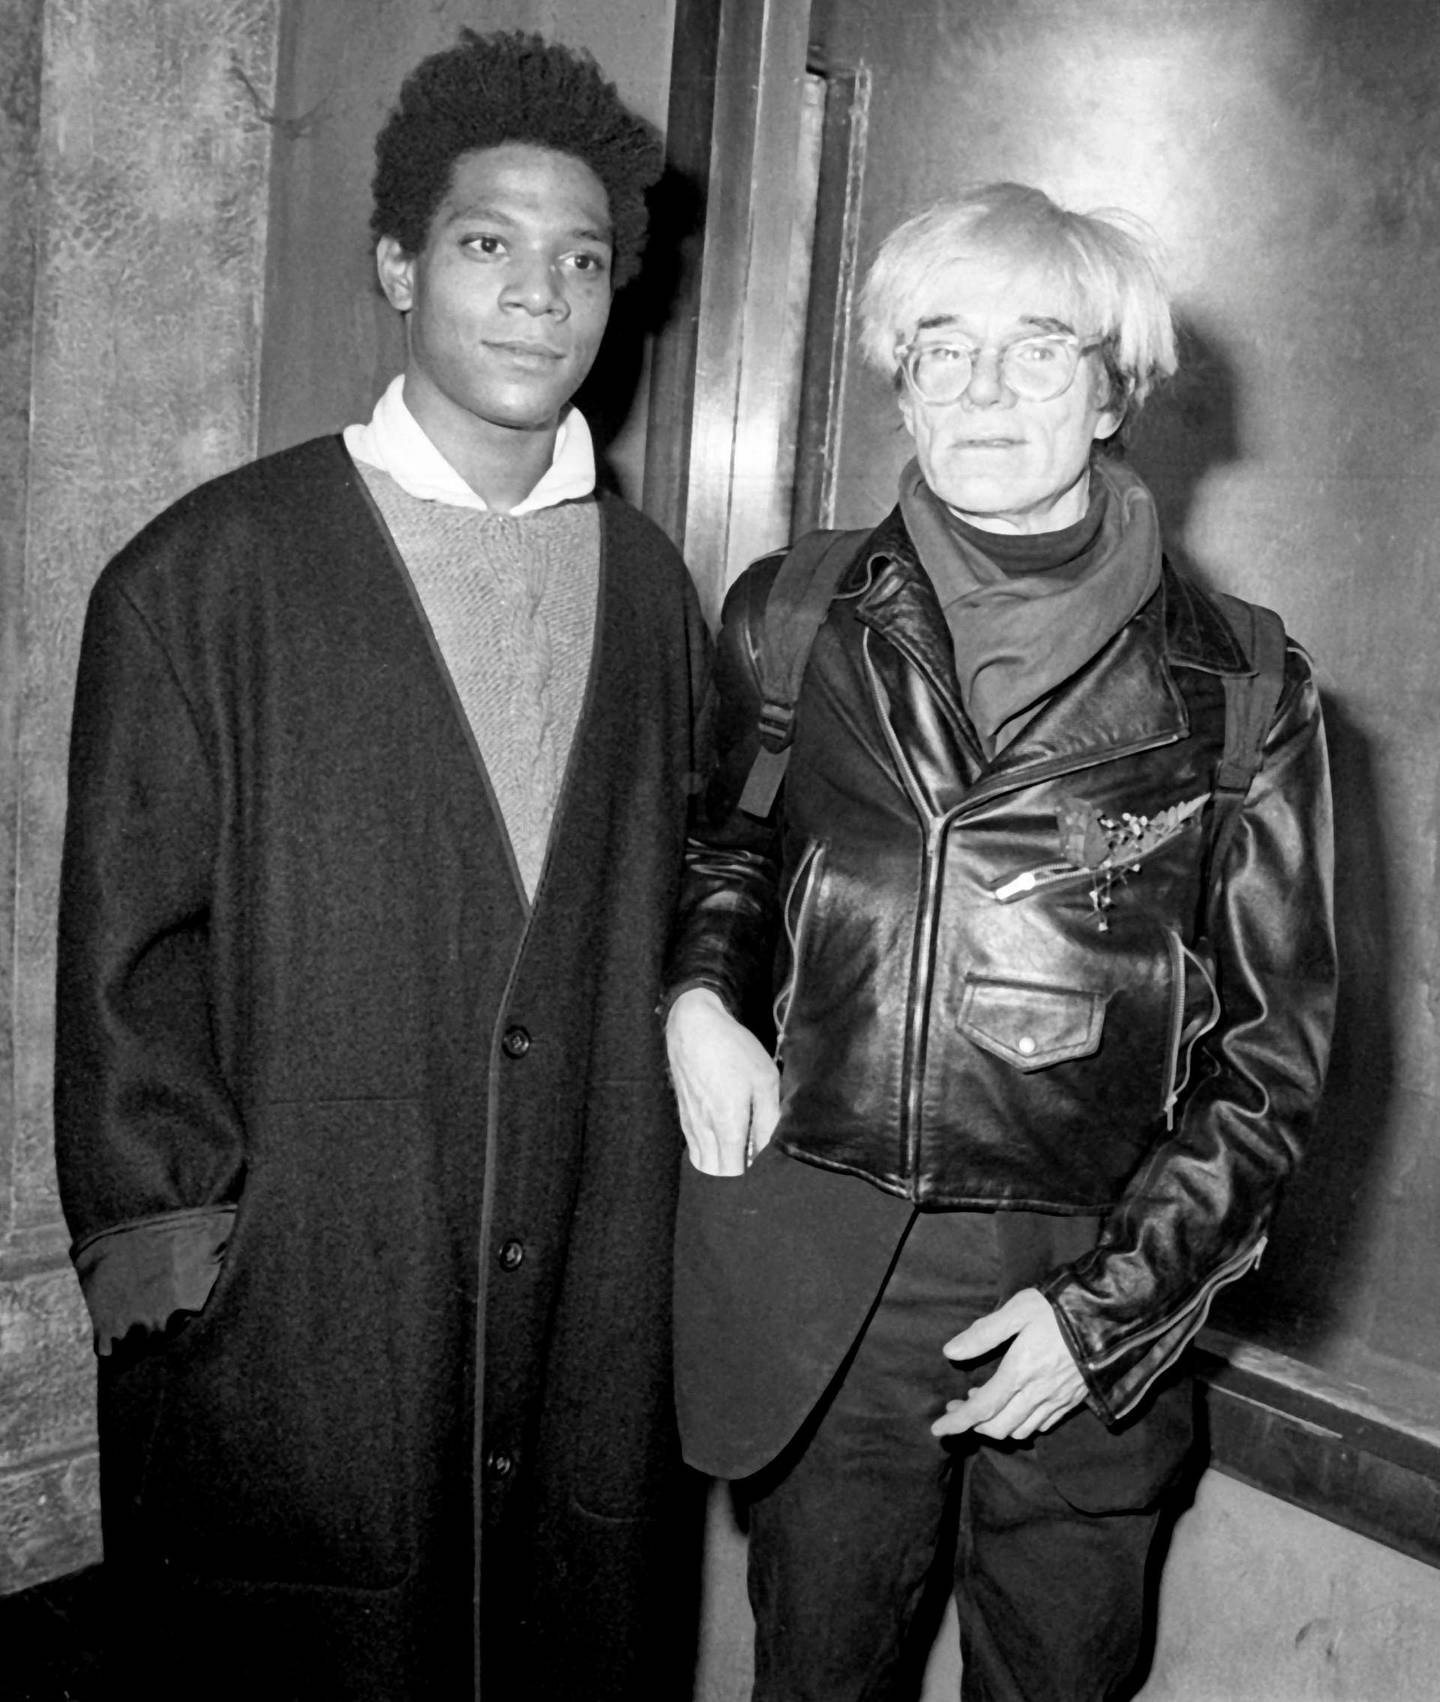 NEW YORK CITY - NOVEMBER 7:  Jean-Michel Basquiat and Andy Warhol attend Gifts For The City Of New York Benefit on November 7, 1984 at Area Nightclub in New York City. (Photo by Ron Galella/WireImage/Getty Images)